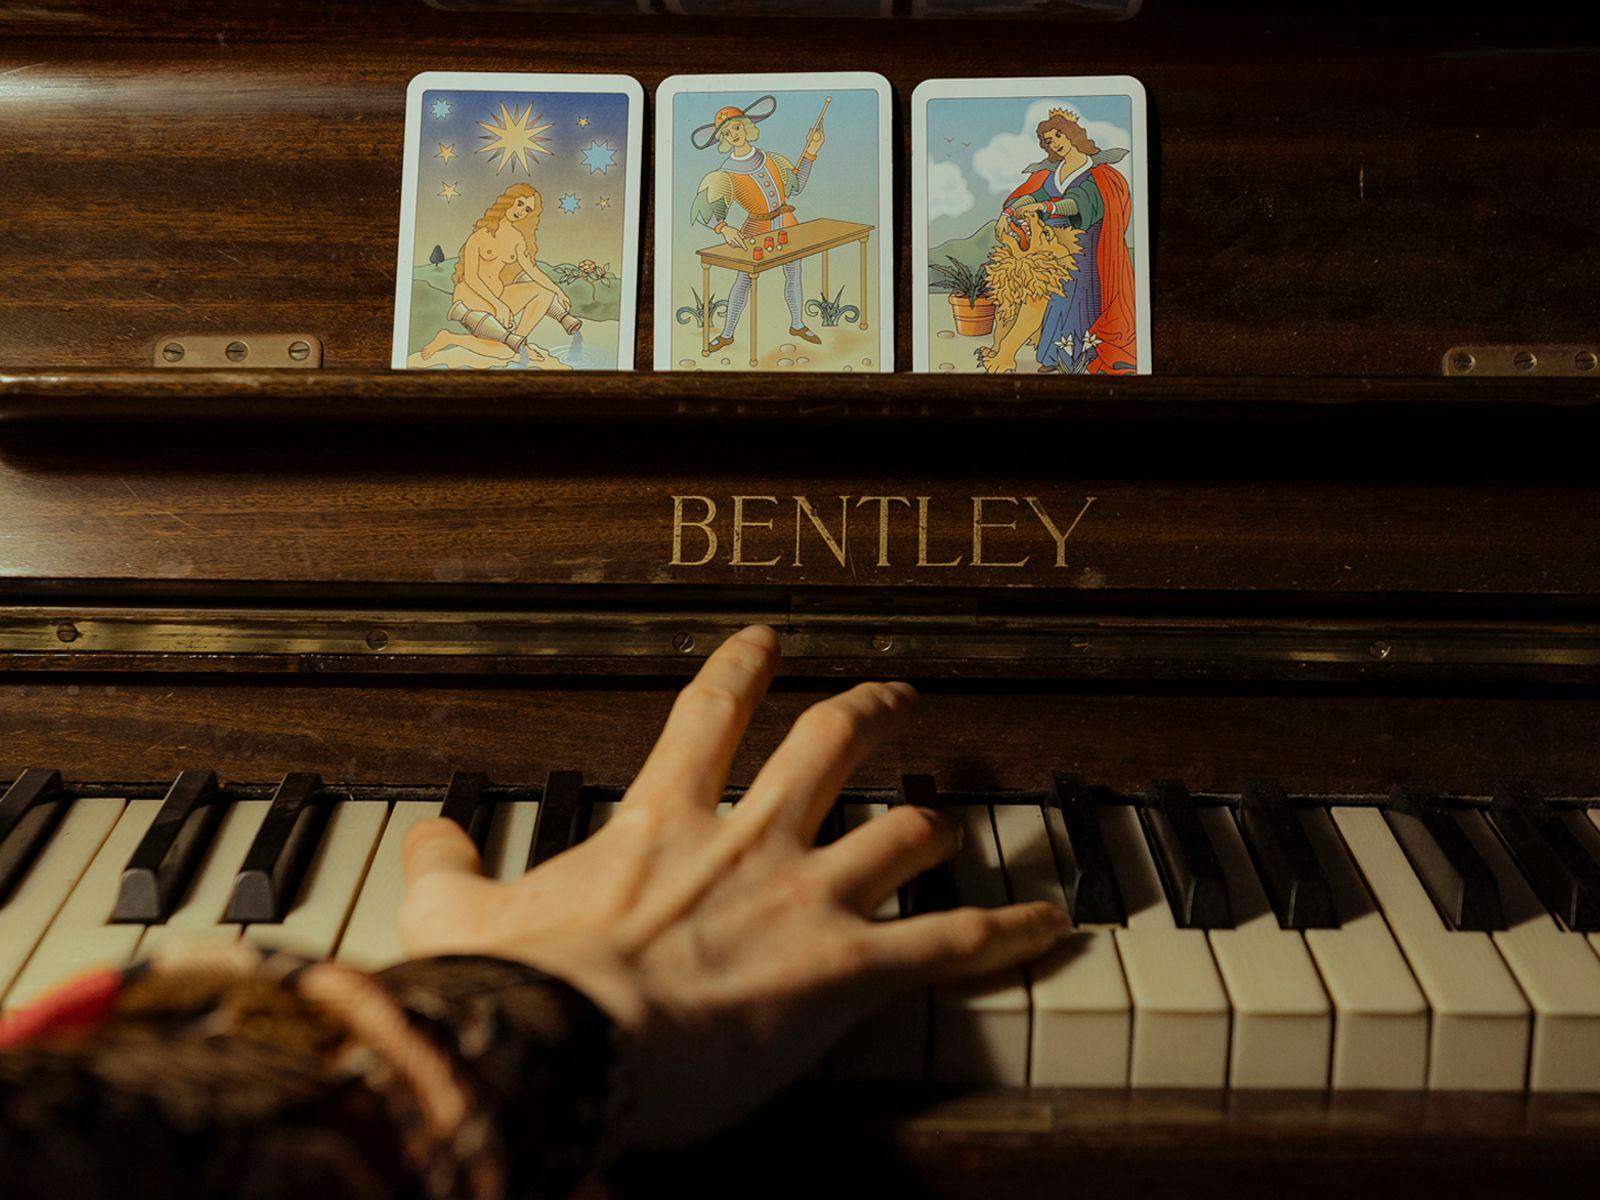 A close-up of a hand playing a Bentley piano. Three tarot-like cards sit on the music sheet sill.